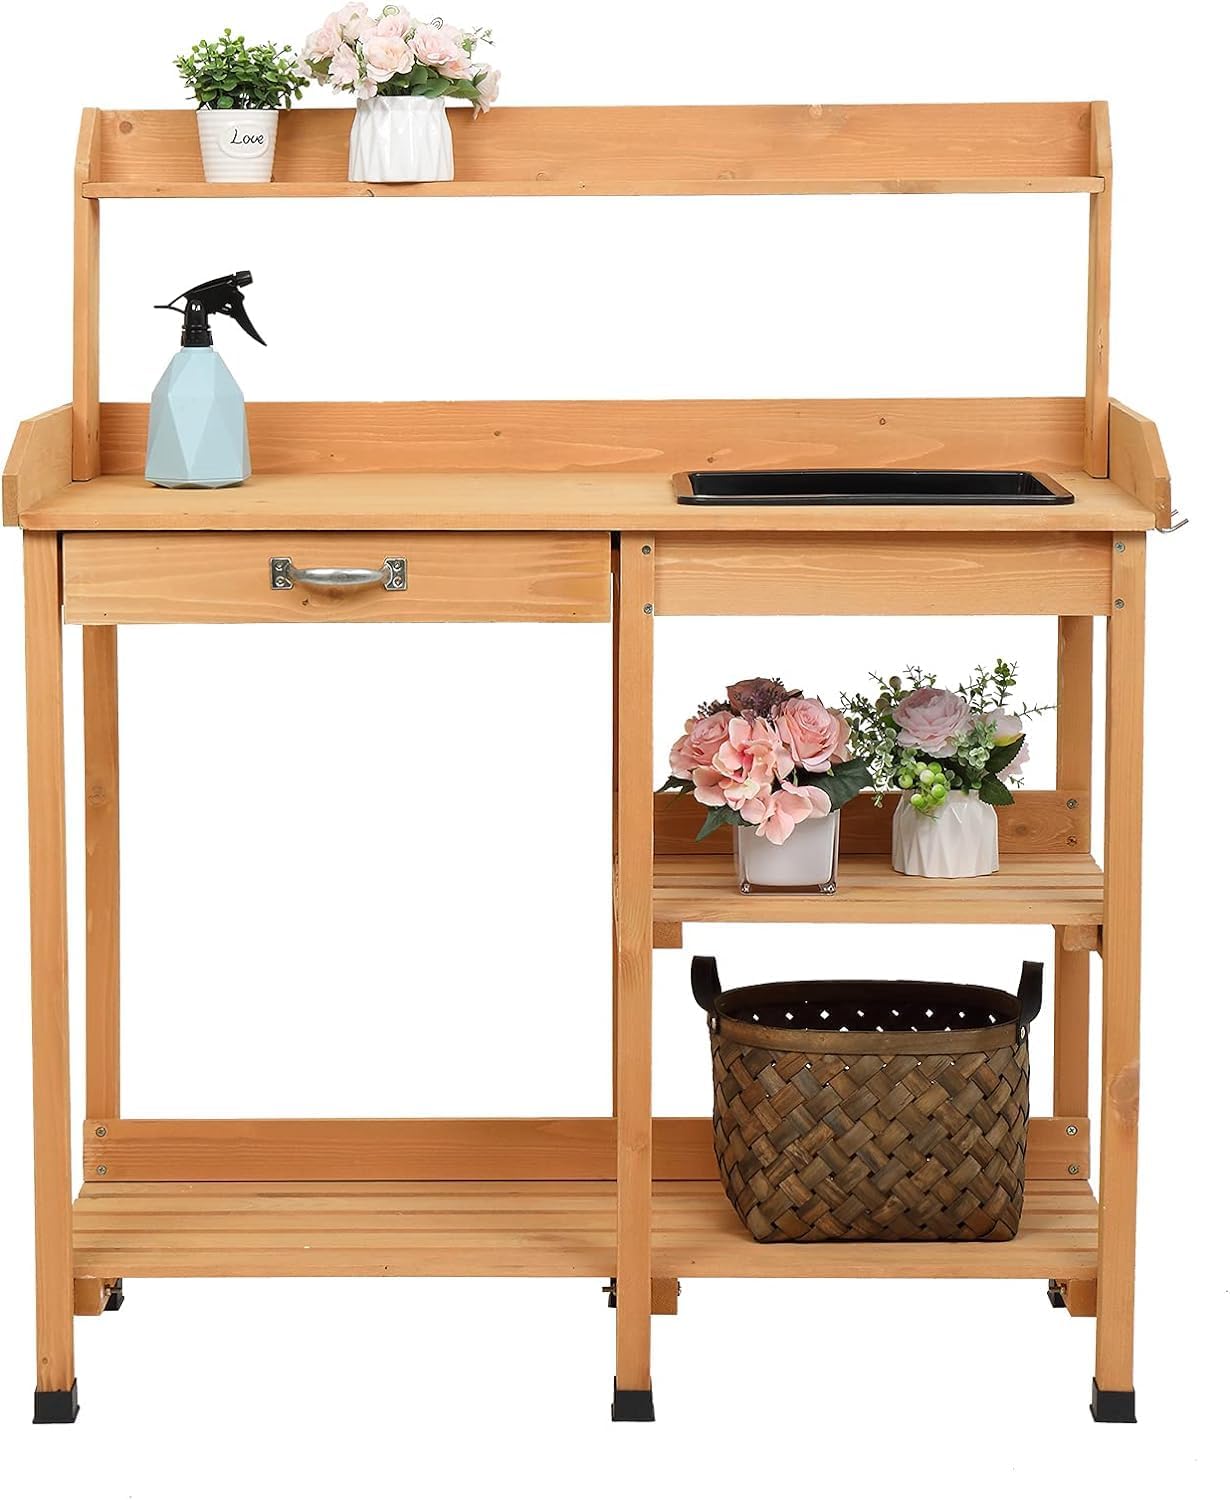 Outdoor Garden Potting Bench with Sink, Drawer, Solid Wood